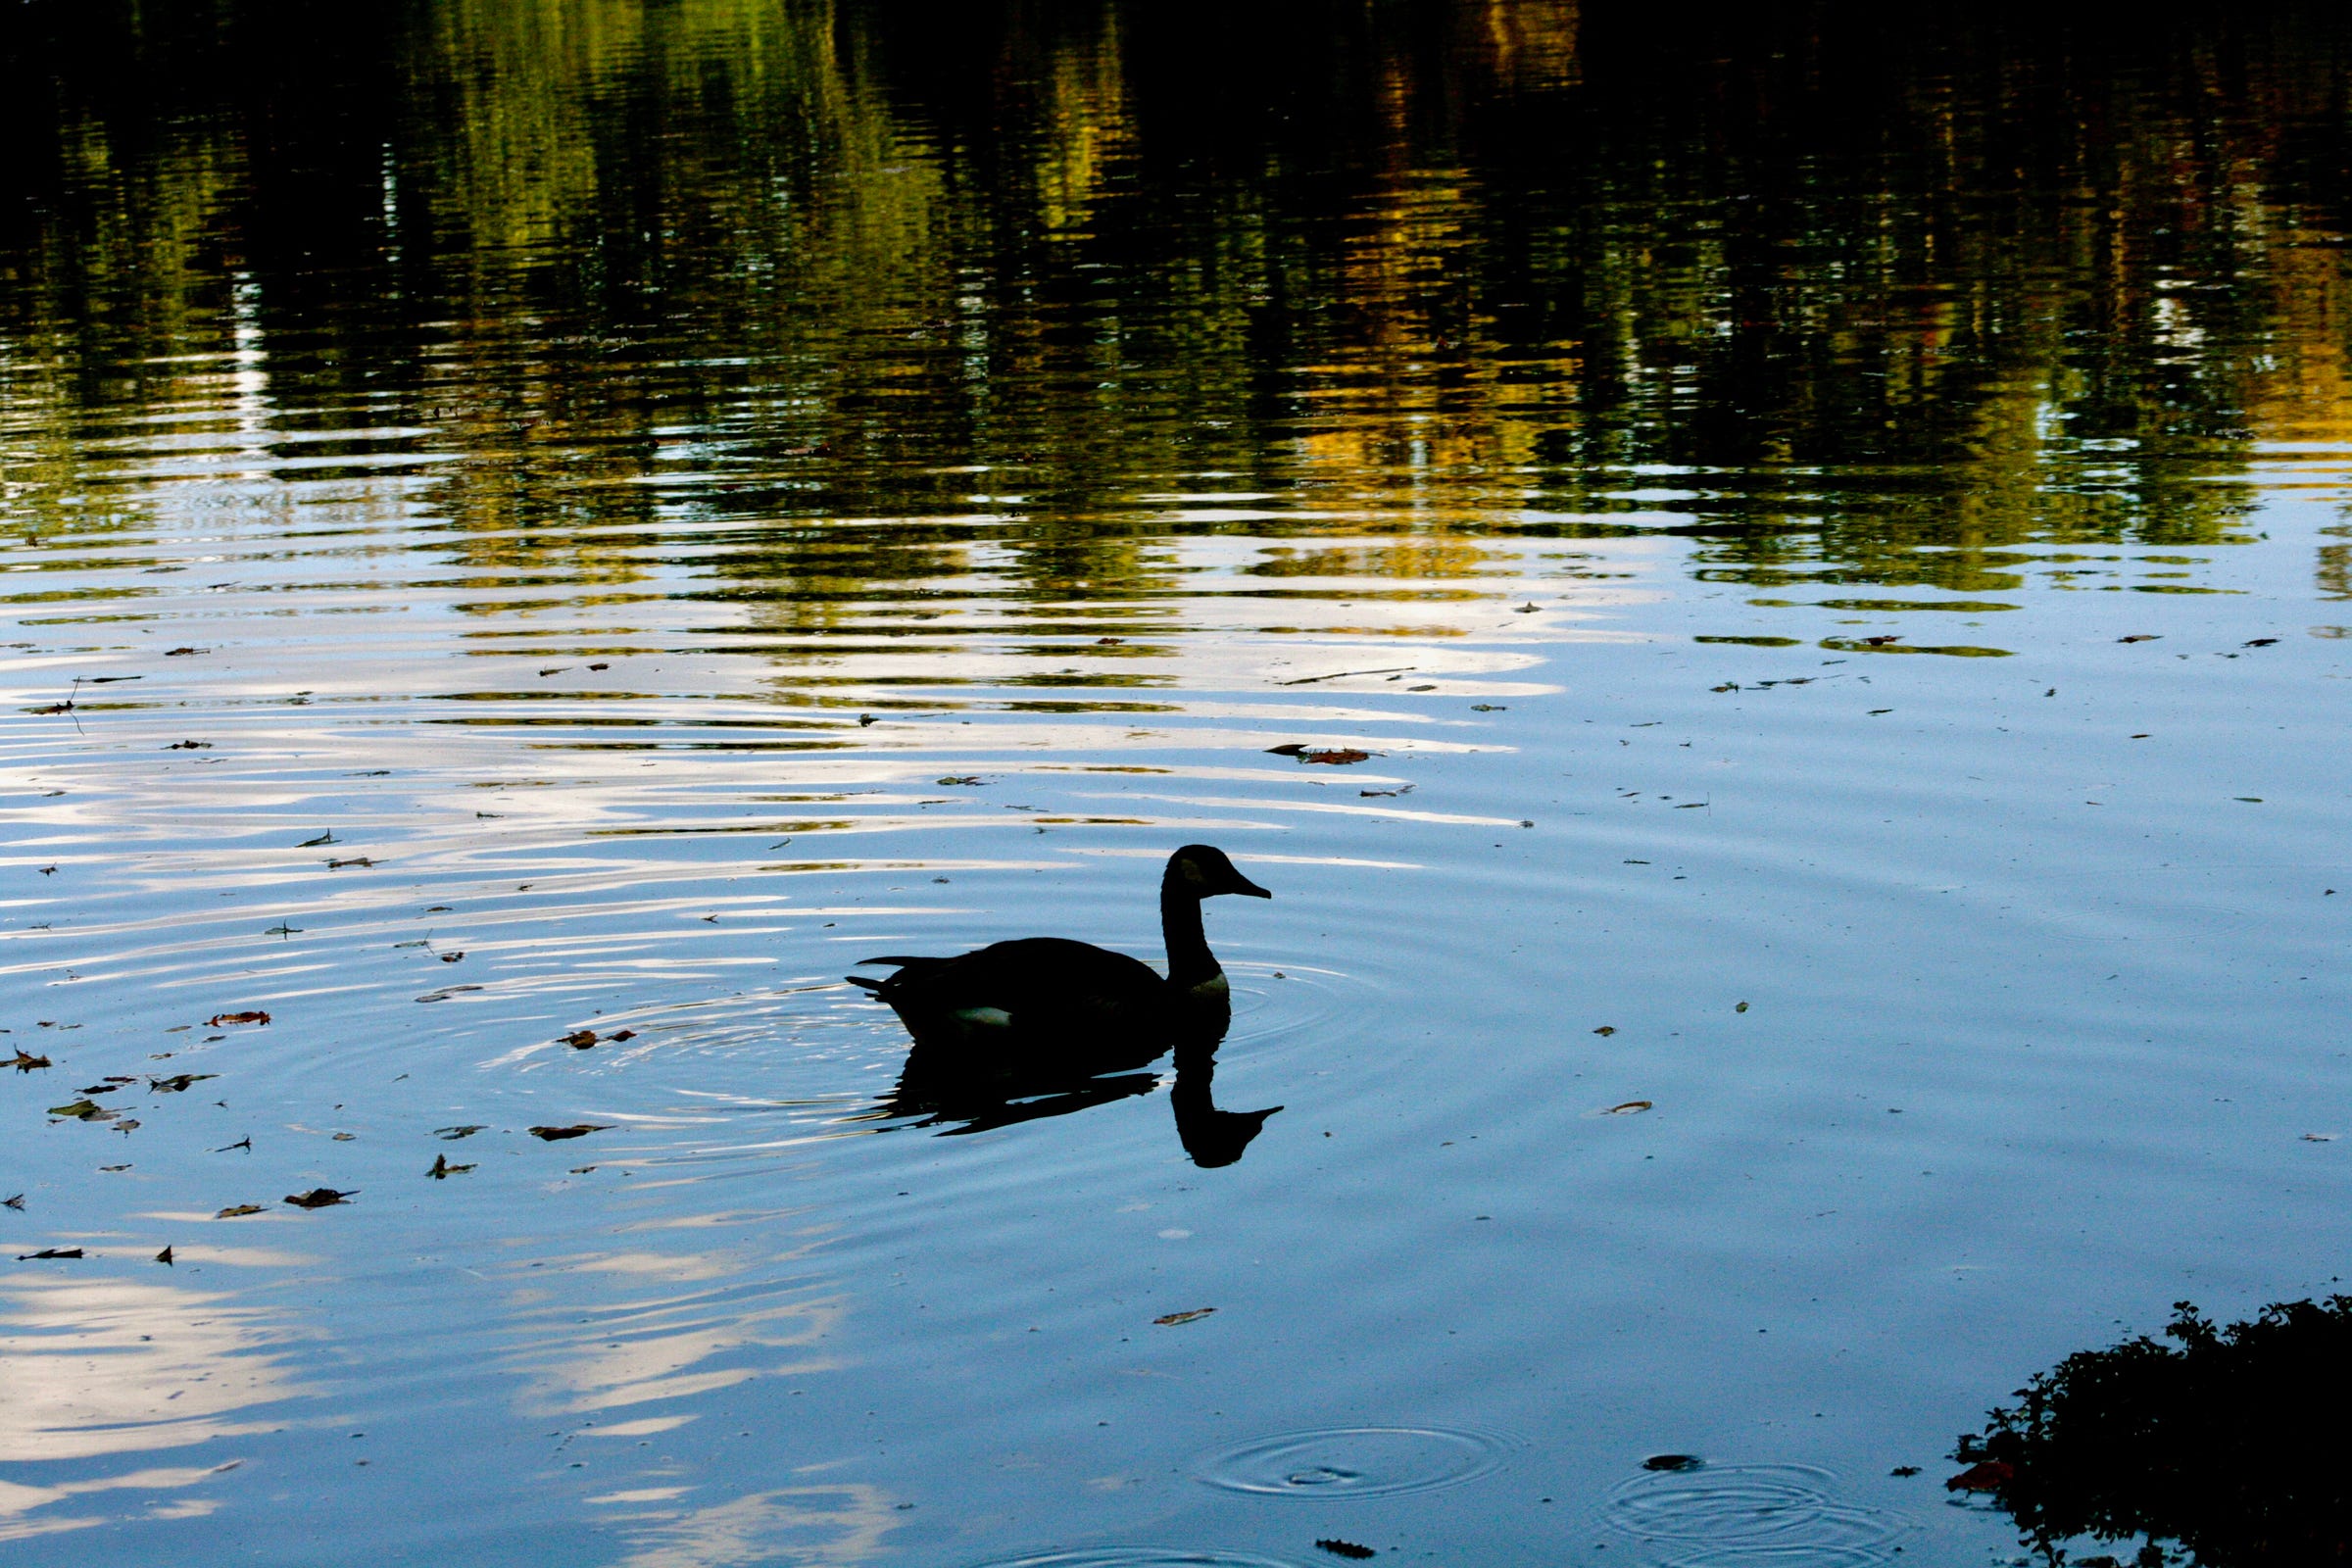 Silhouette of duck on pond with ripples